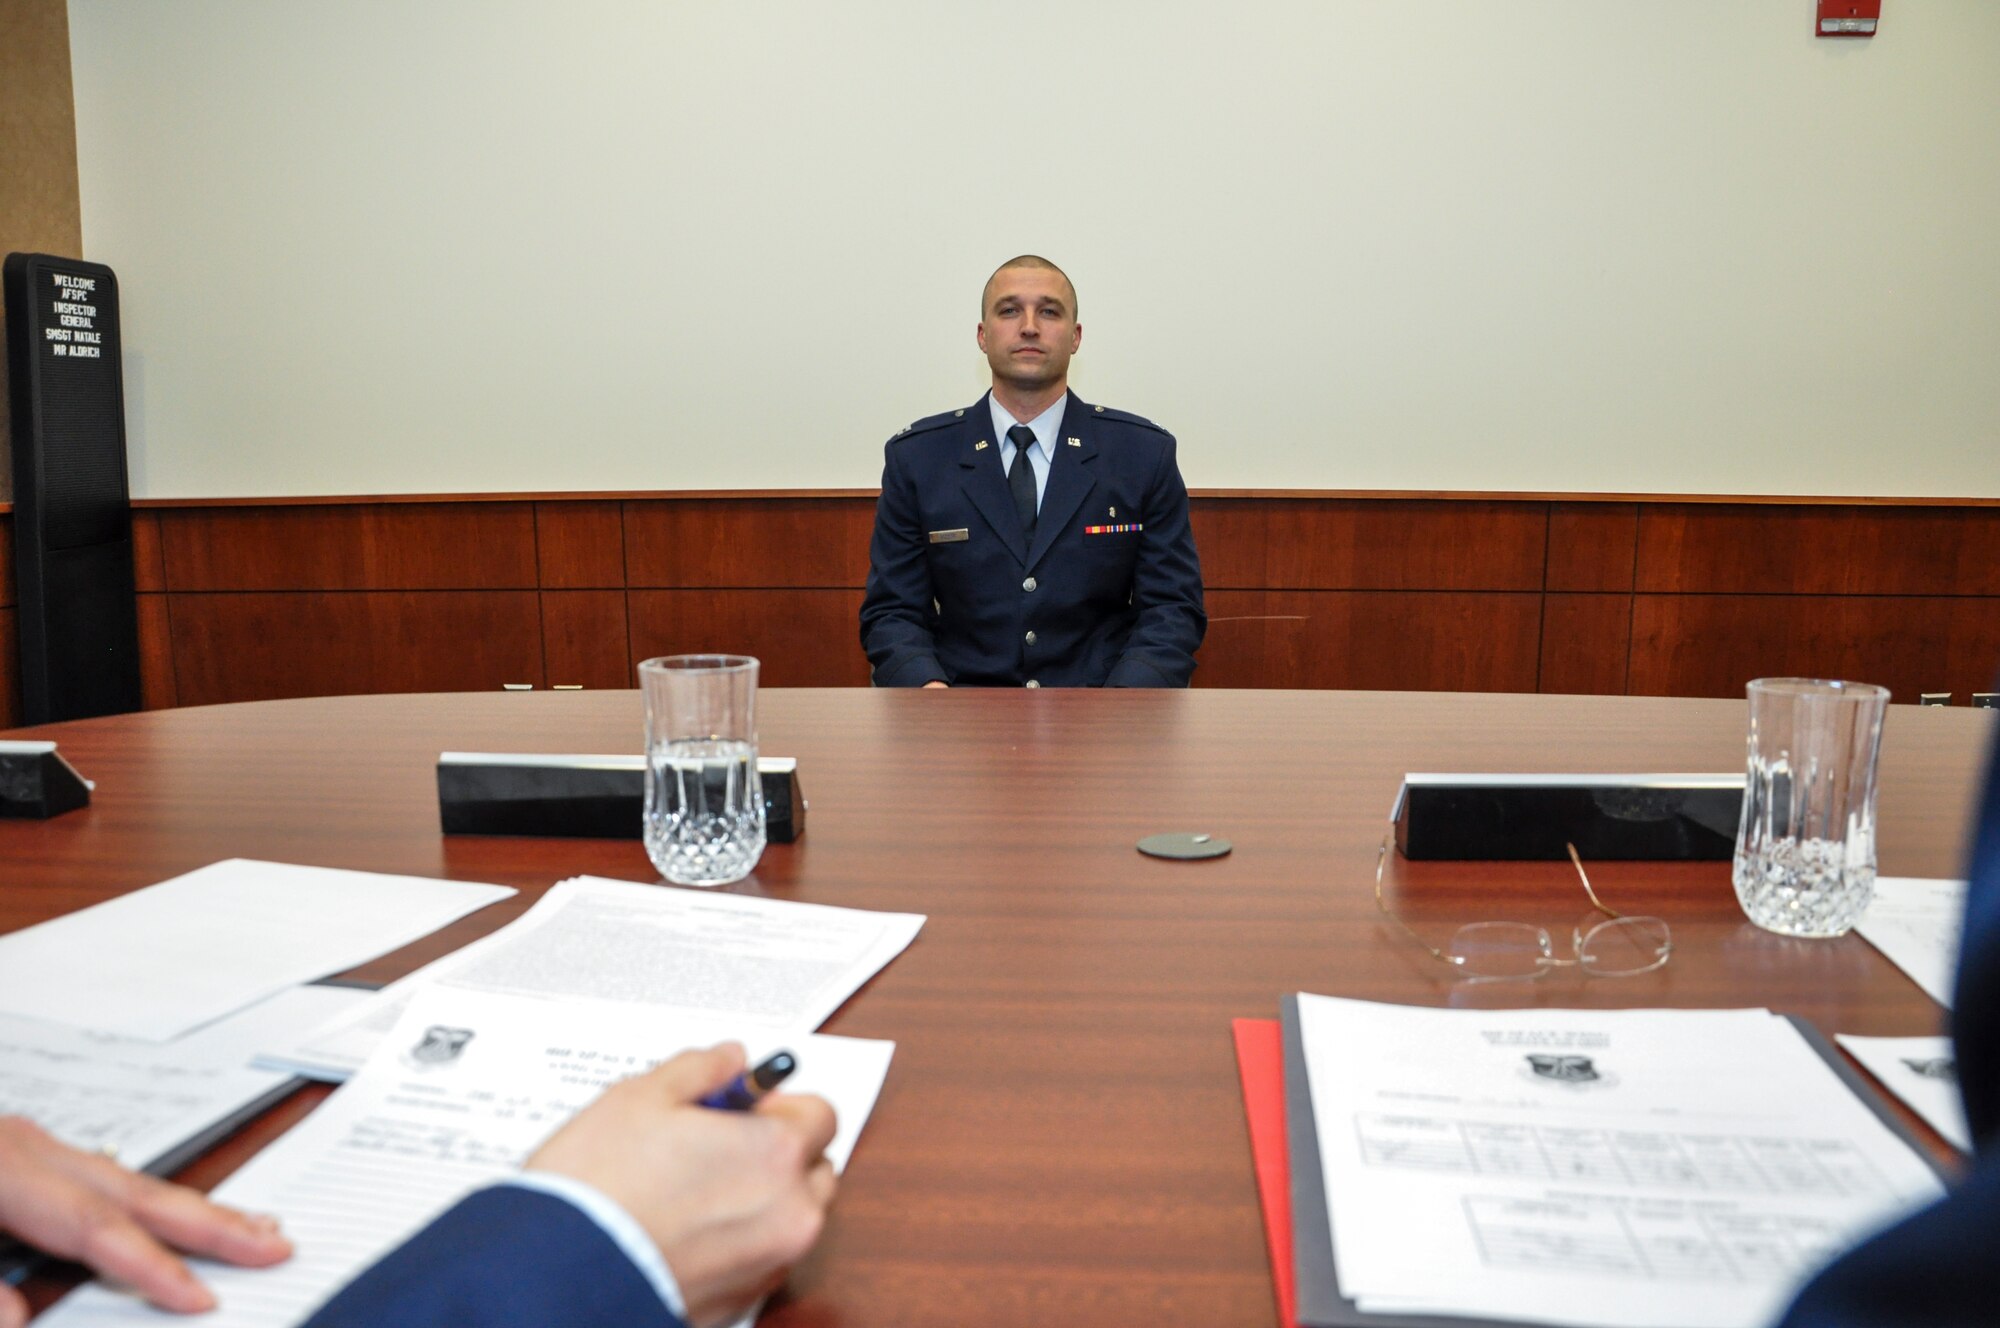 Capt. John Doleski, 460th Medical Group company grade officer category annual award nominee, sits before a mock annual awards board panel Jan. 27, 2014, at the 460th Space Wing headquarters building on Buckley Air Force Base, Colo. All competitors met the annual awards board as part of their overall submission packages. (U.S. Air Force photo by Staff Sgt. Nicholas Rau/Released)